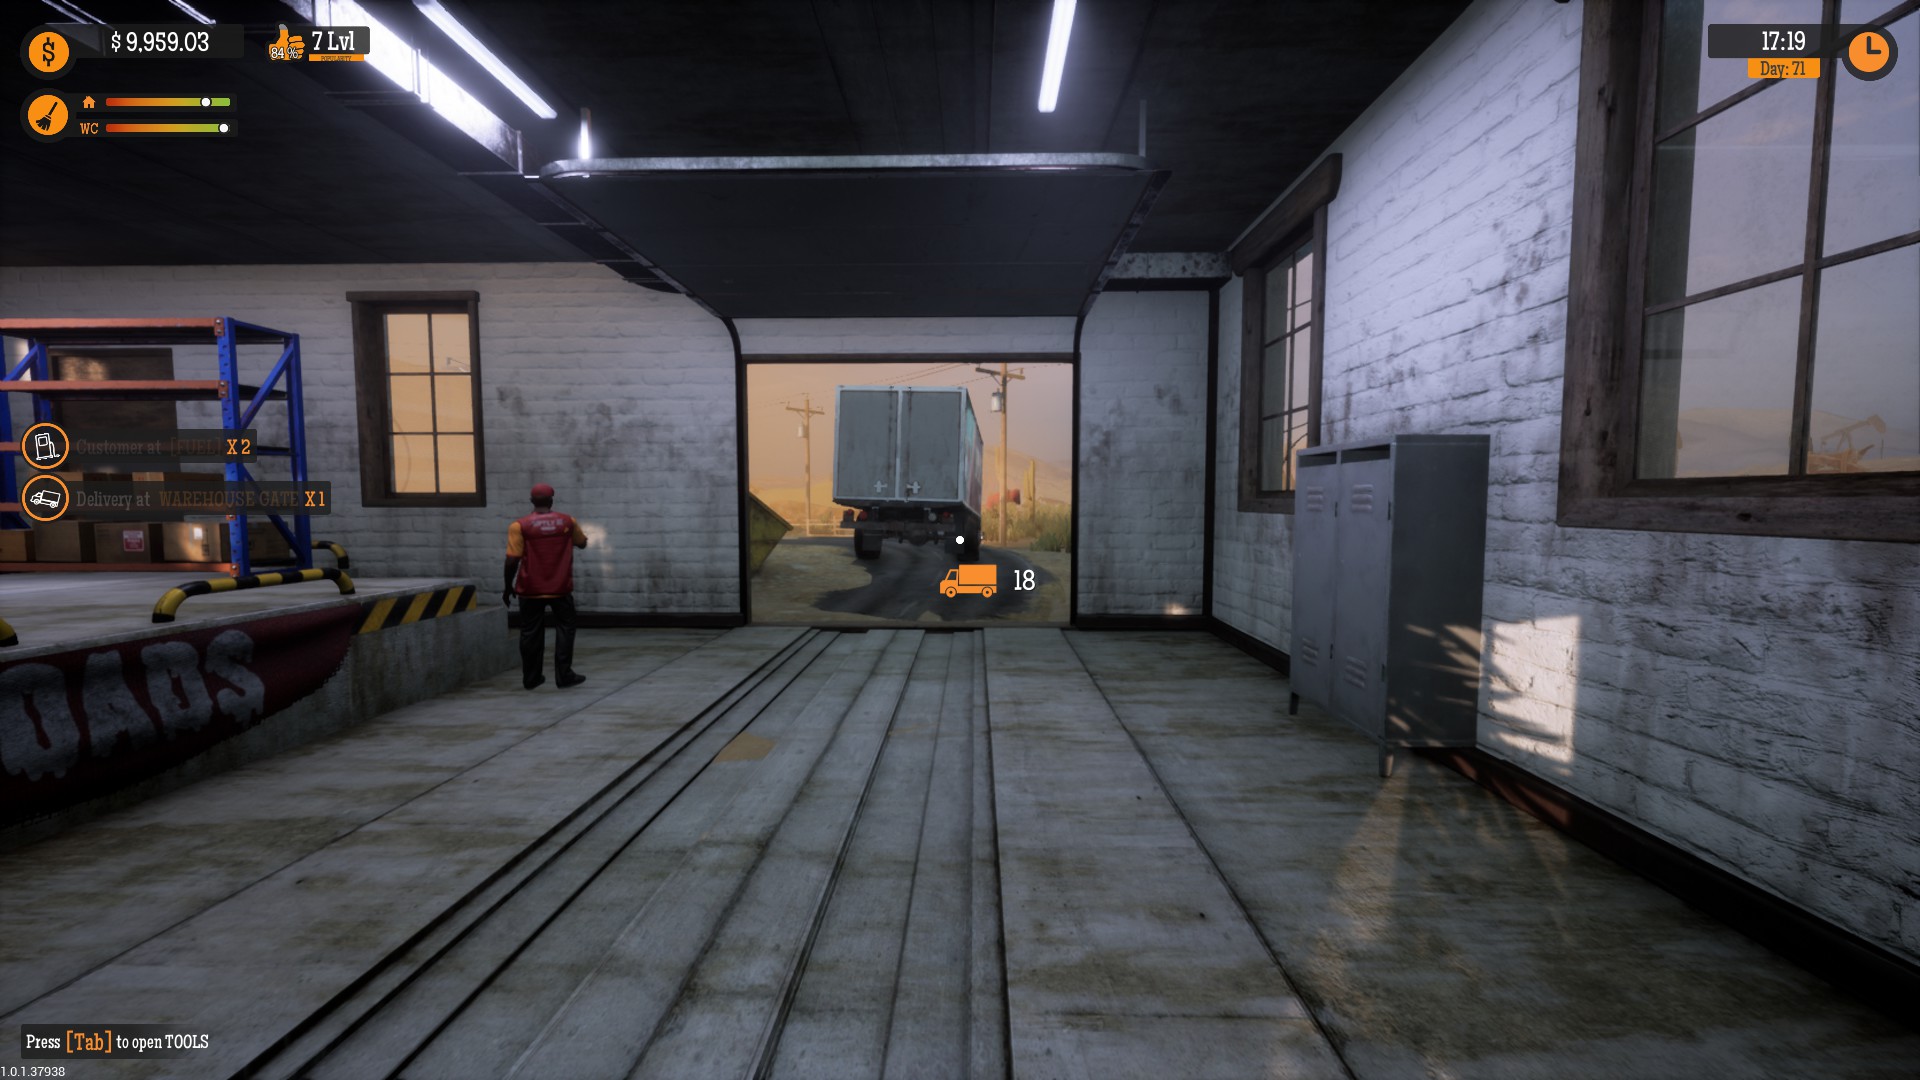 Gas Station Simulator - How to Fix Truck Using Broom Tips - Warehouse - C685AE2